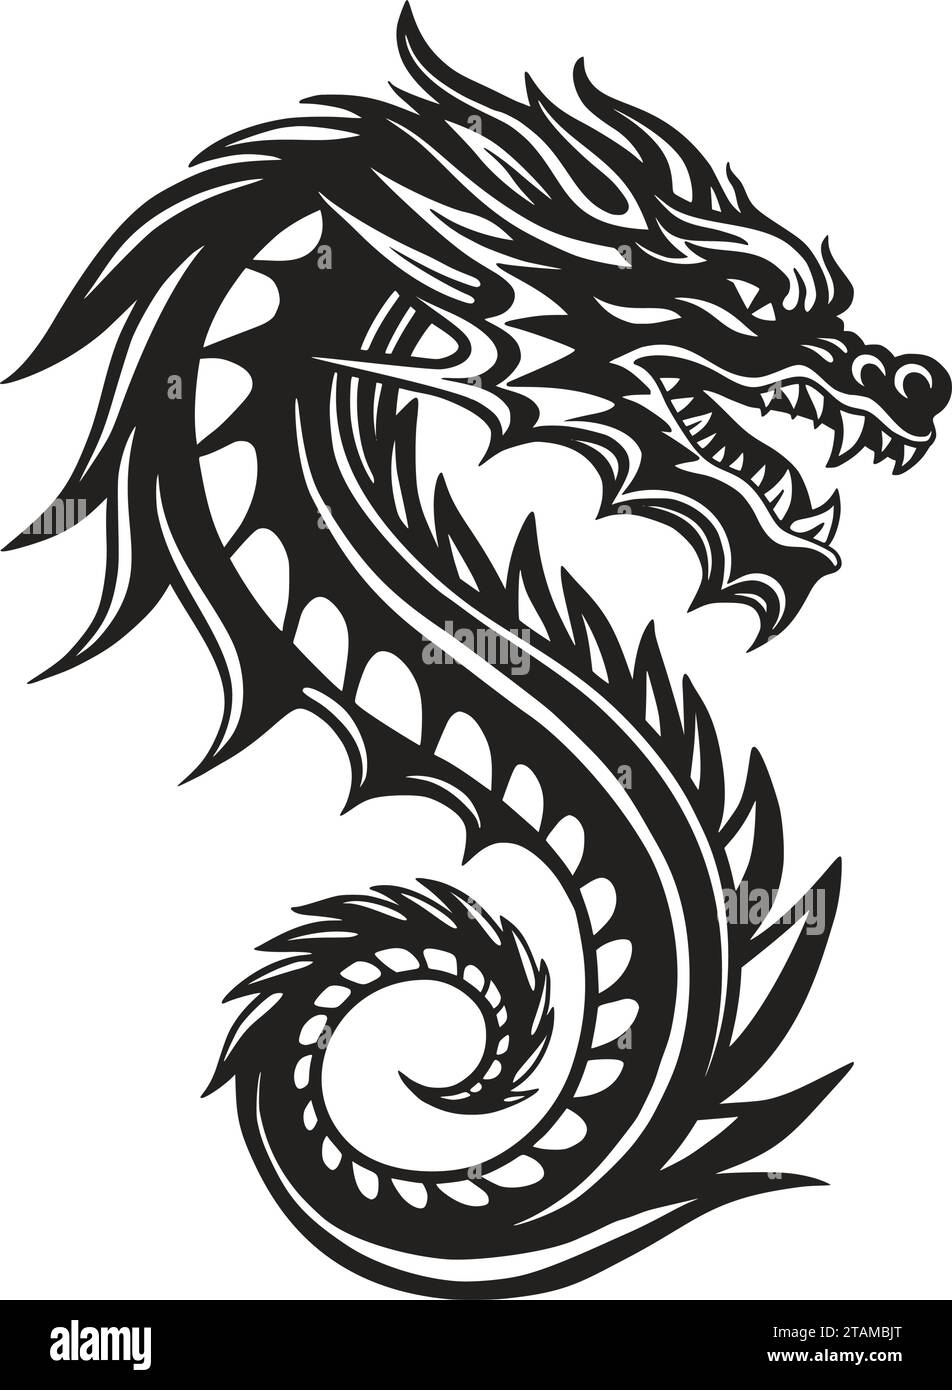 Dragon vector black silhouette art. Chinese New Year symbol Doodle fantasy oriental monster asian character beast logo Stock Vector